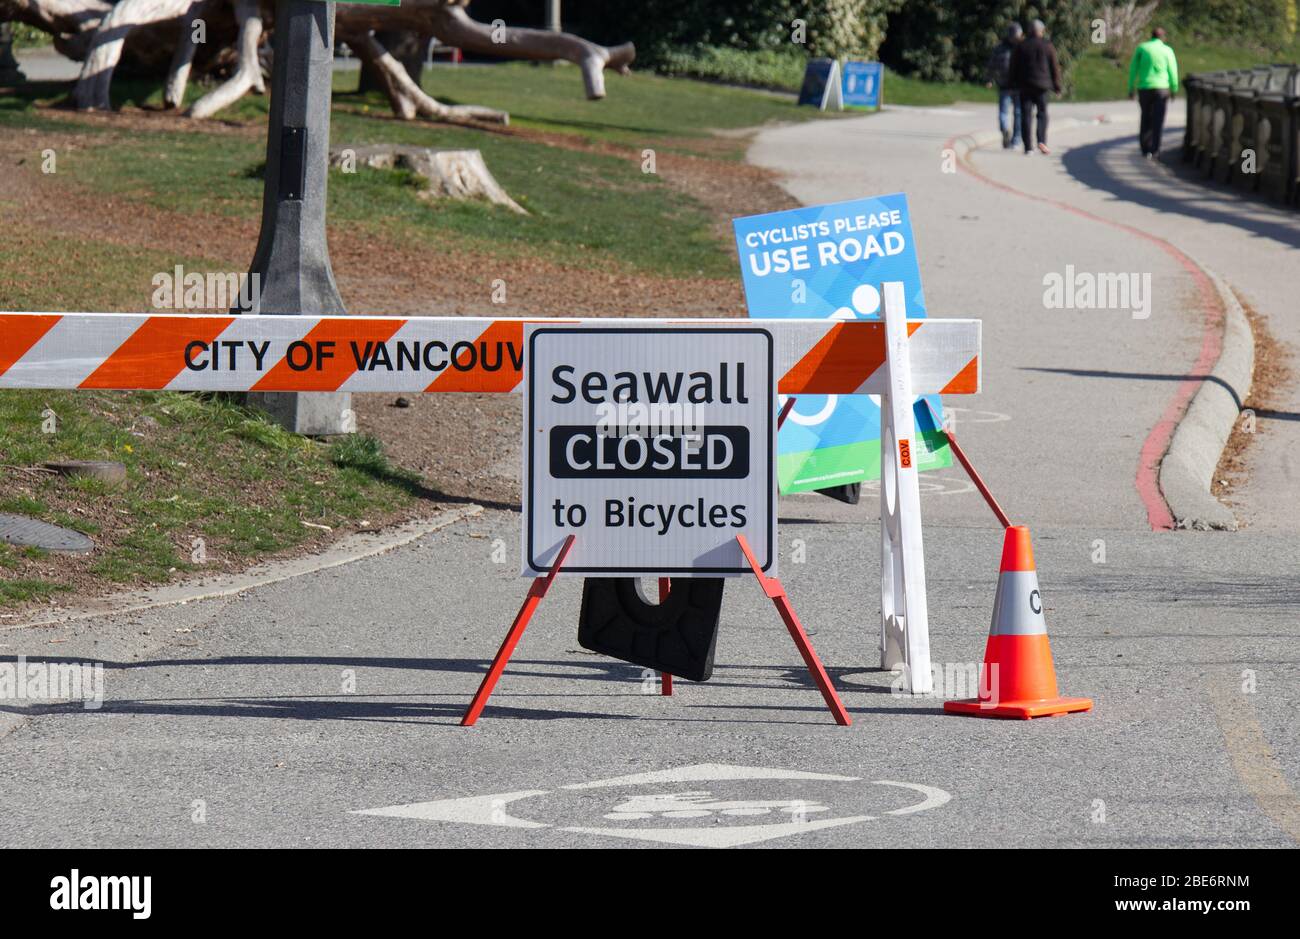 Vancouver, Canada - April 11, 2020: View of sign 'Seawall Closed to Bicycles' due to COVID-19(coronavirus) Stock Photo